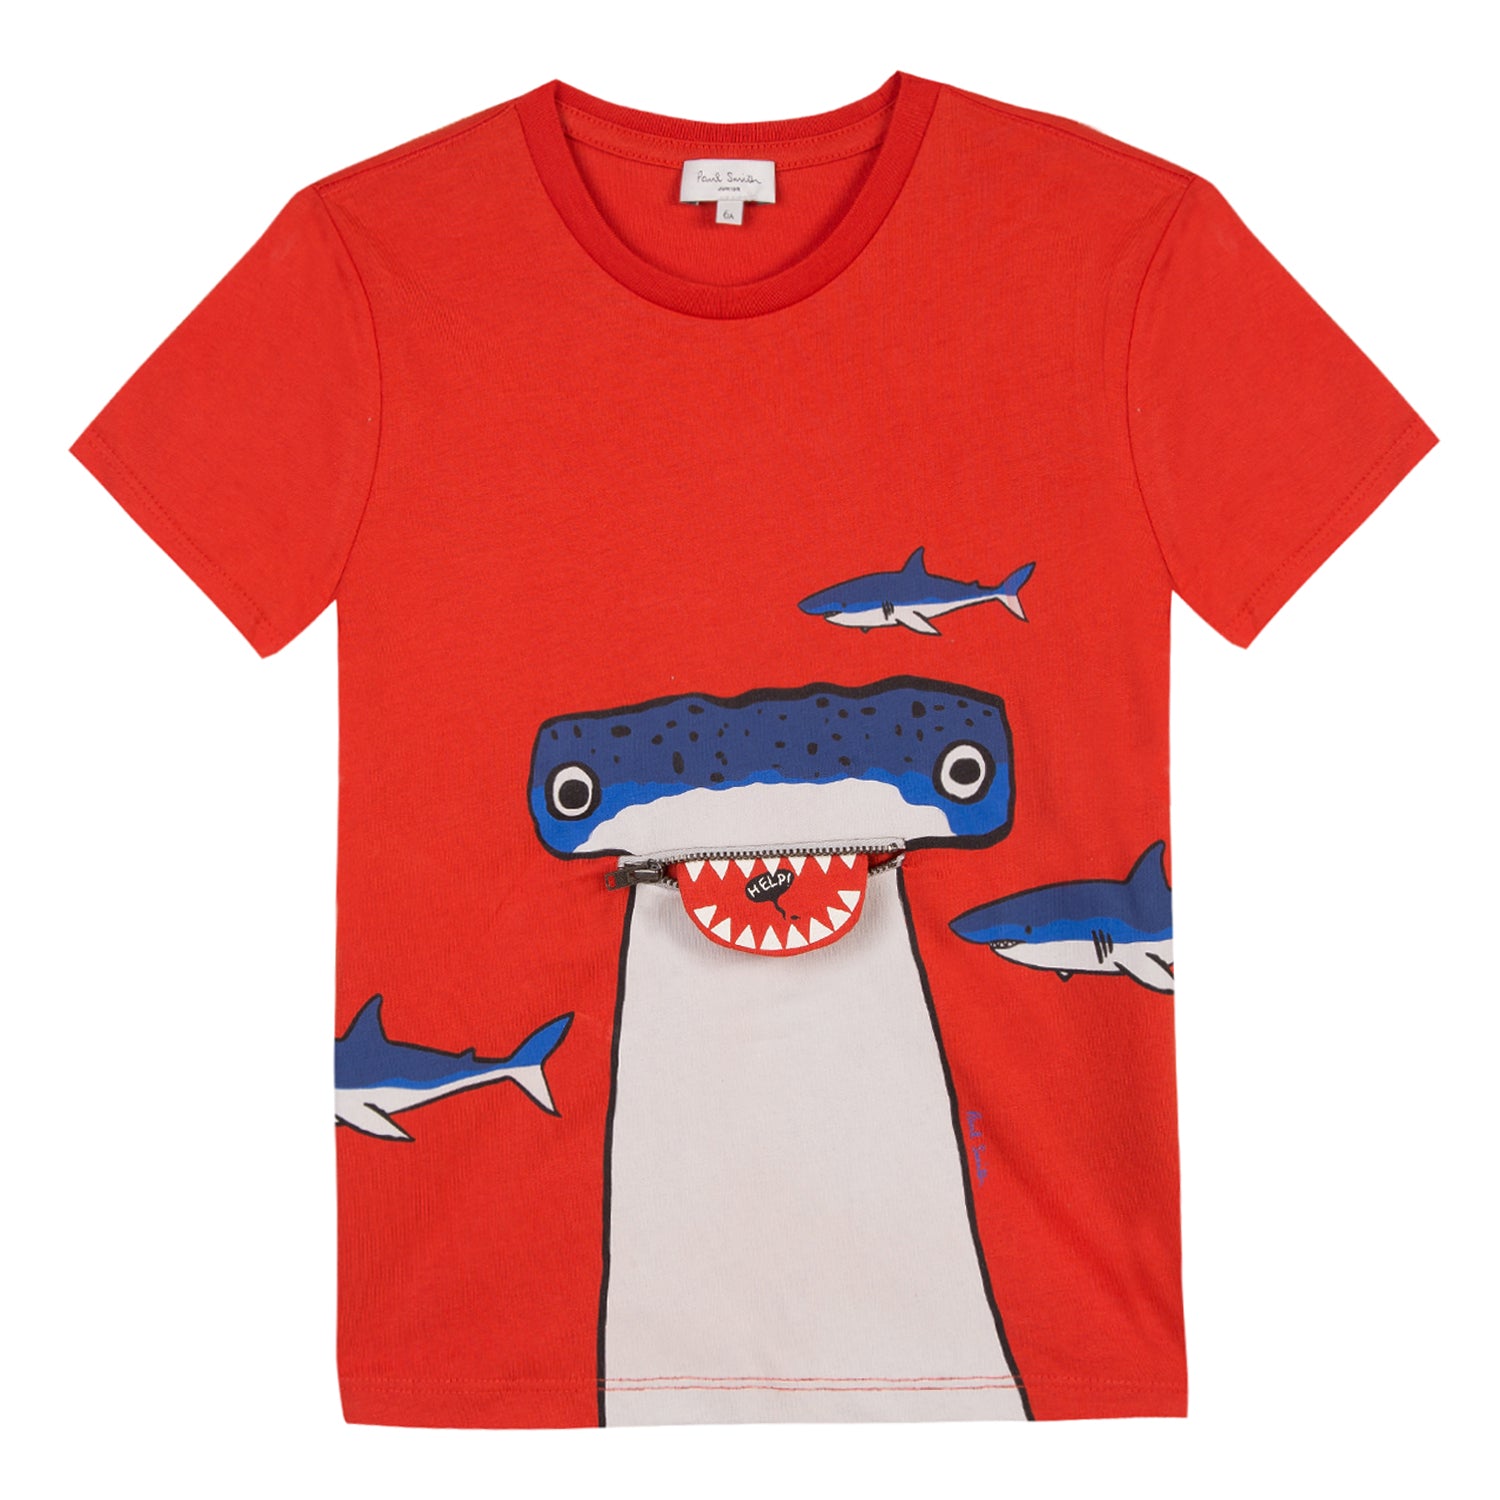 Baby Boys Red Printed Cotton T-shirt